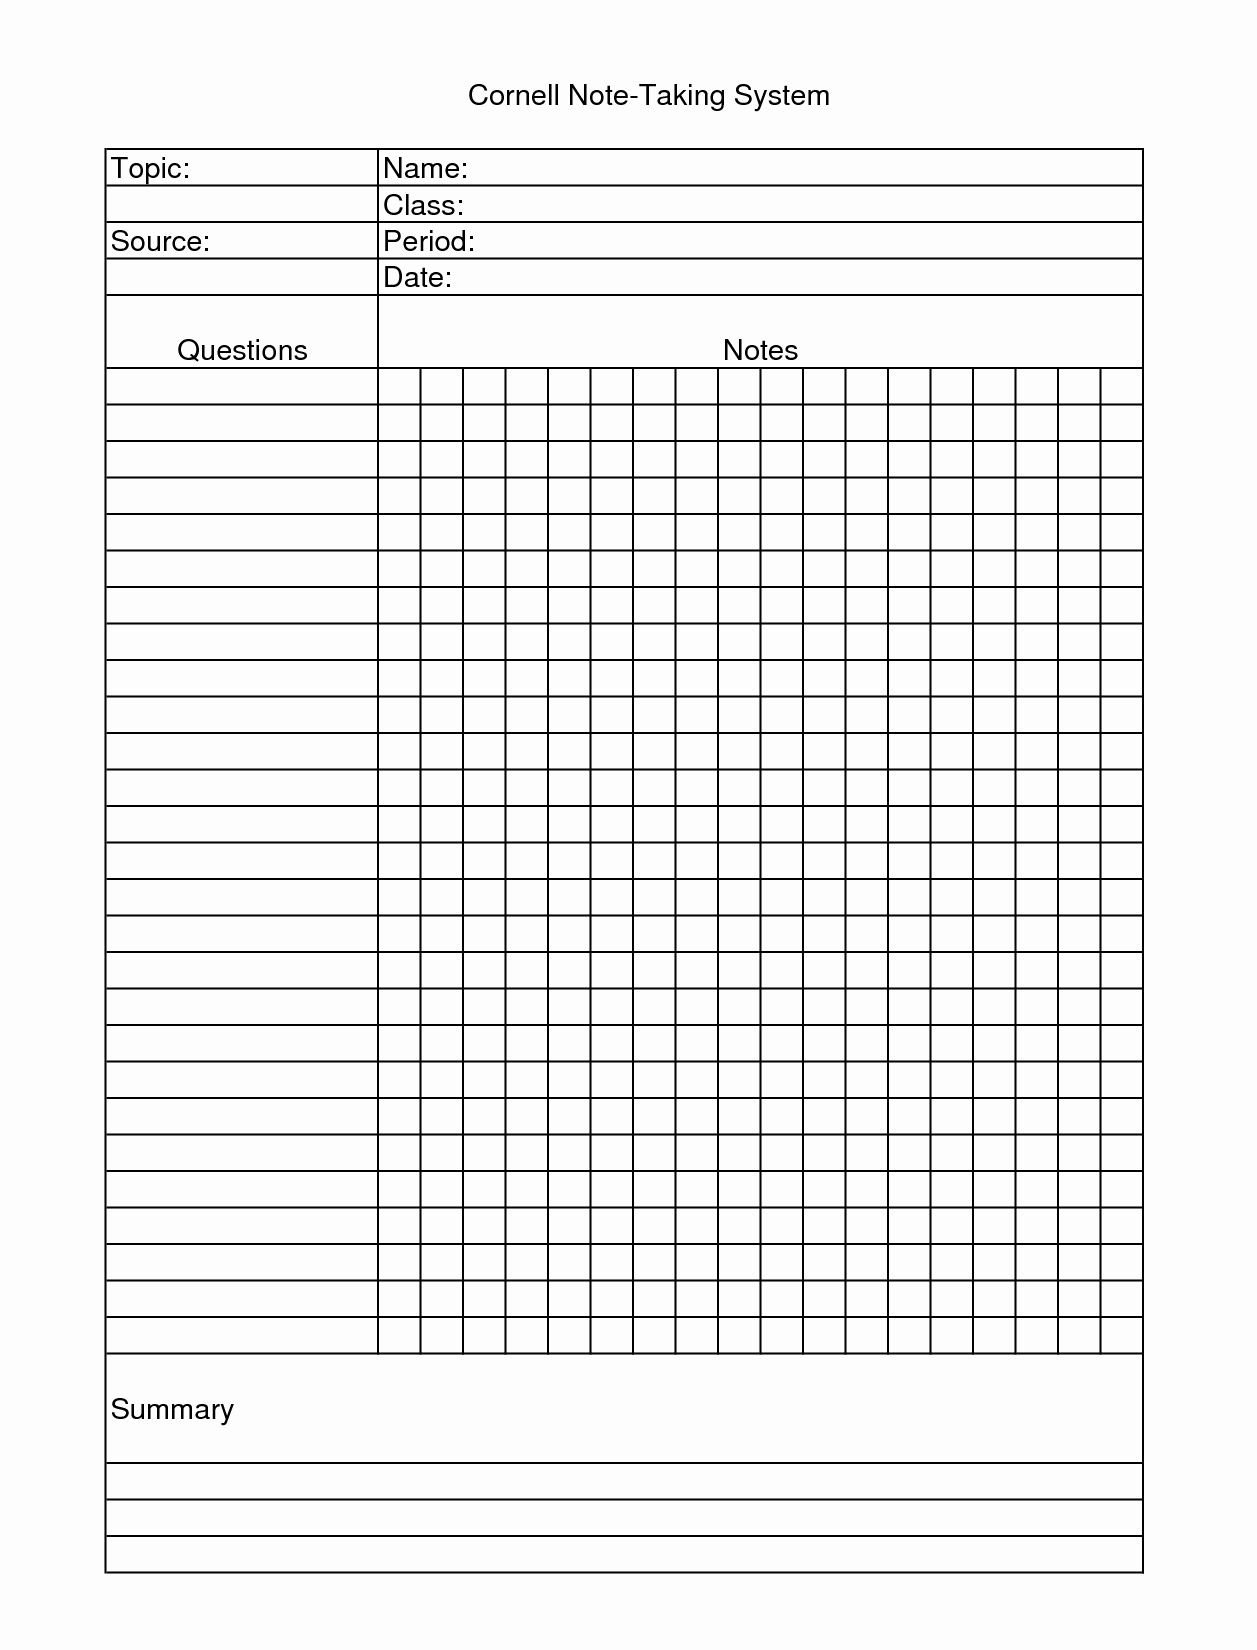 cornell-notes-template-word-doc-digitally-credible-calendars-cornell-notes-template